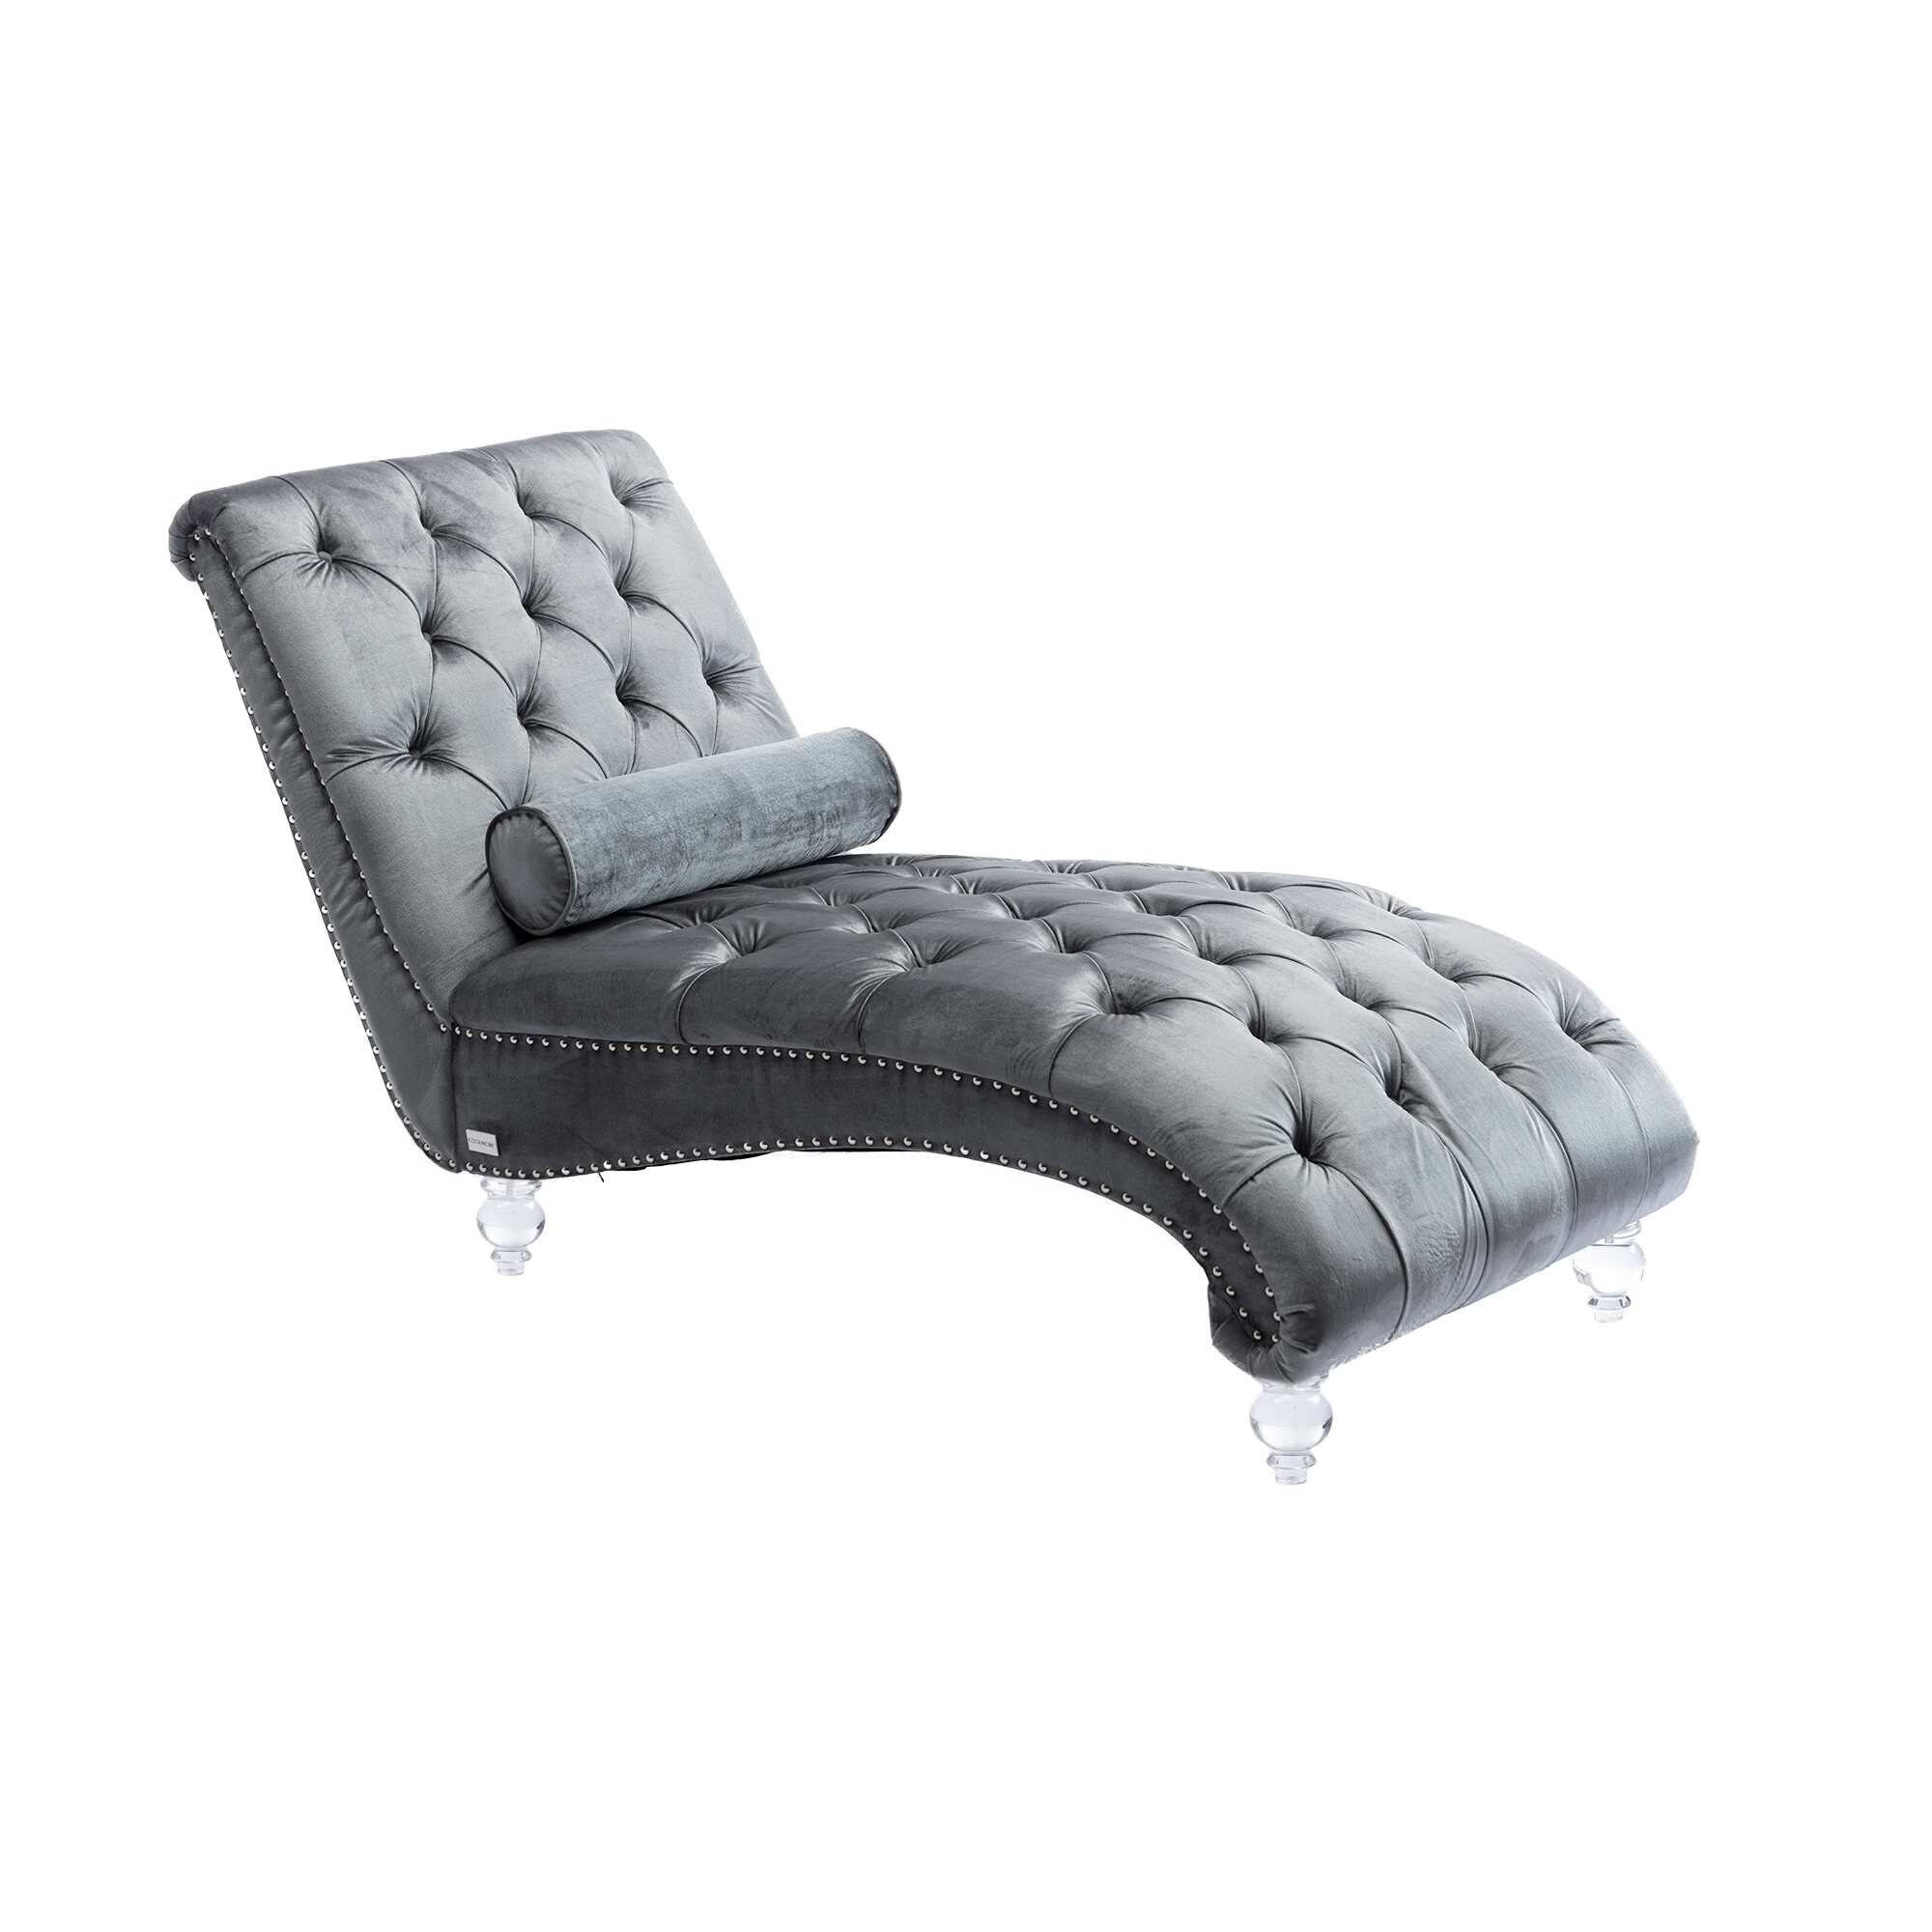 Modern Luxury Style Leisure Concubine Sofa with Solid Acrylic Feet, Comfortable Sleeper Chair for Adults